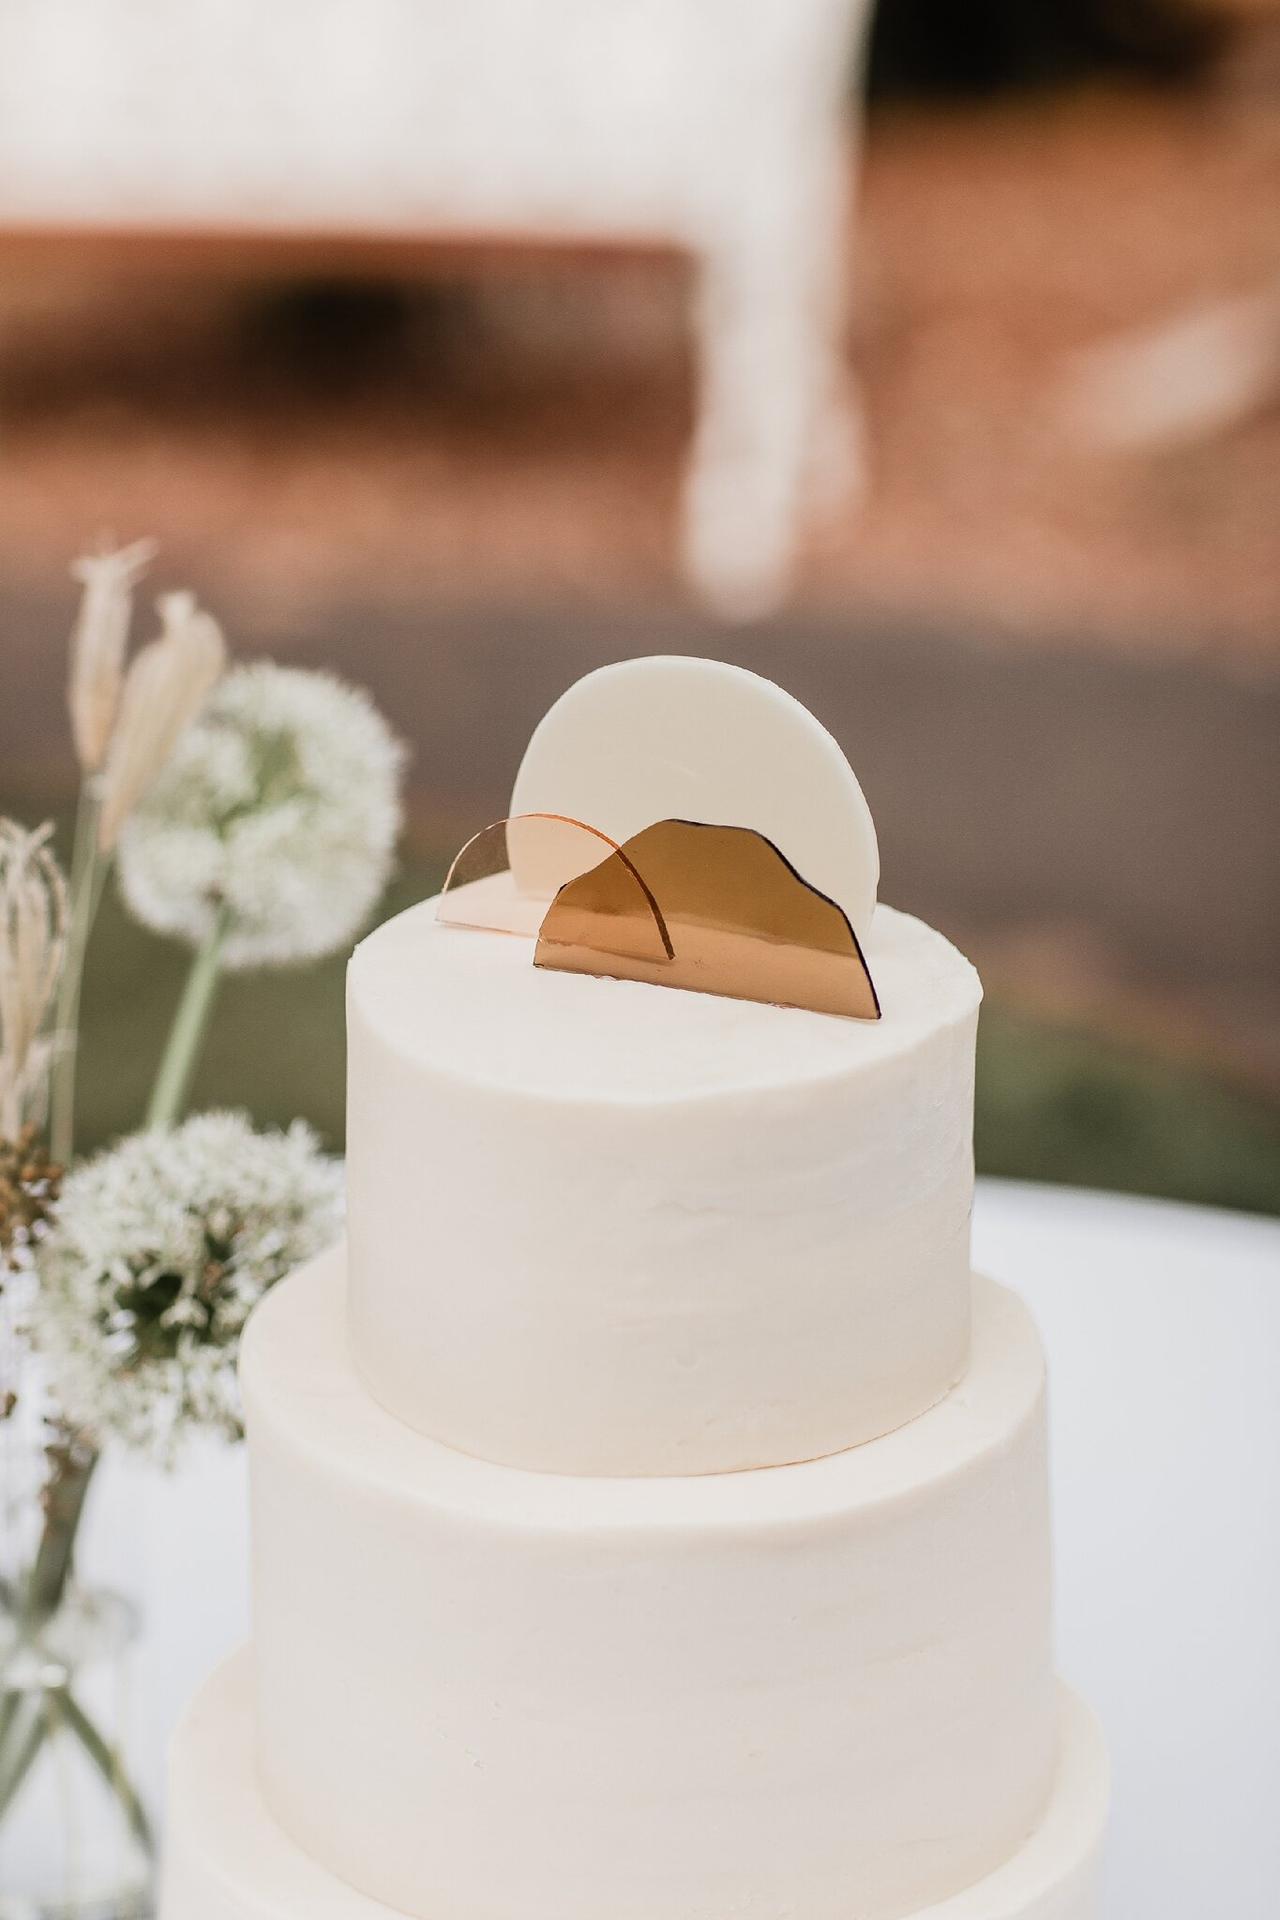 25 Best Simple Wedding Cakes 2021 : Two-Tiered Buttercream Wedding Cake